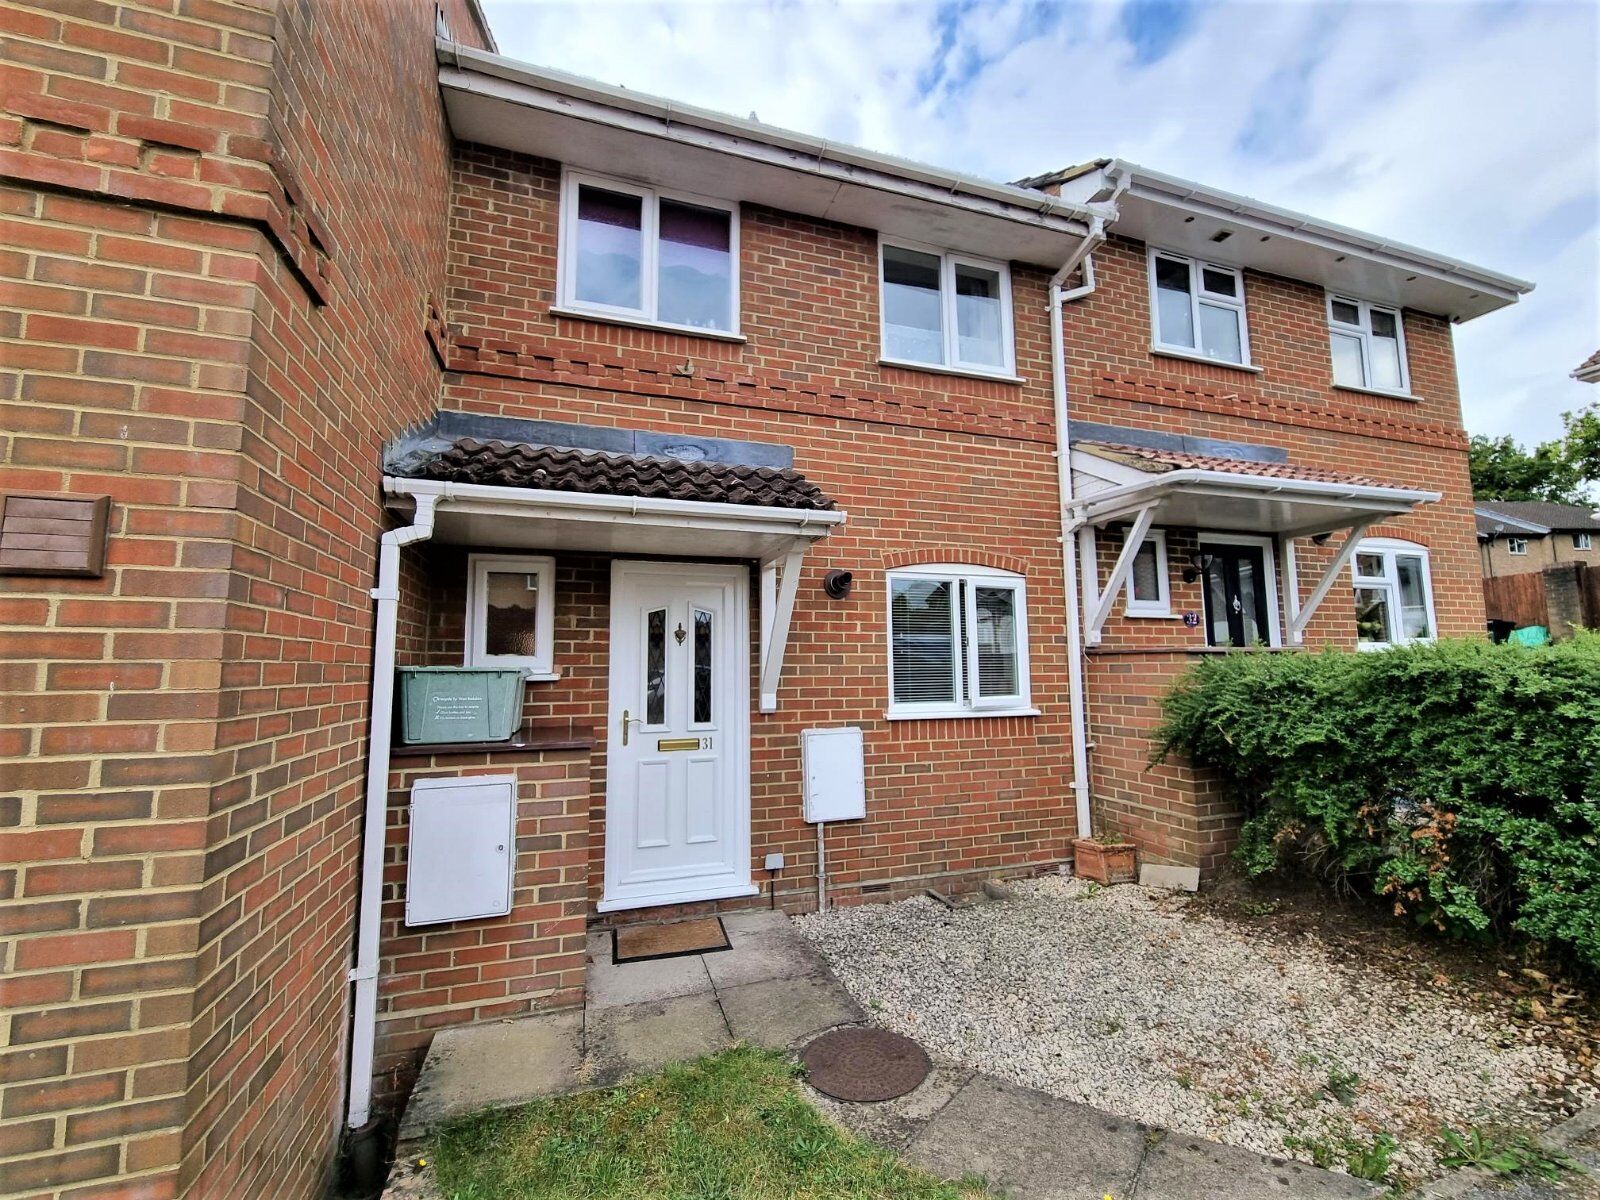 3 bedroom mid terraced house for sale Dauntless Road, Burghfield Common, RG7, main image